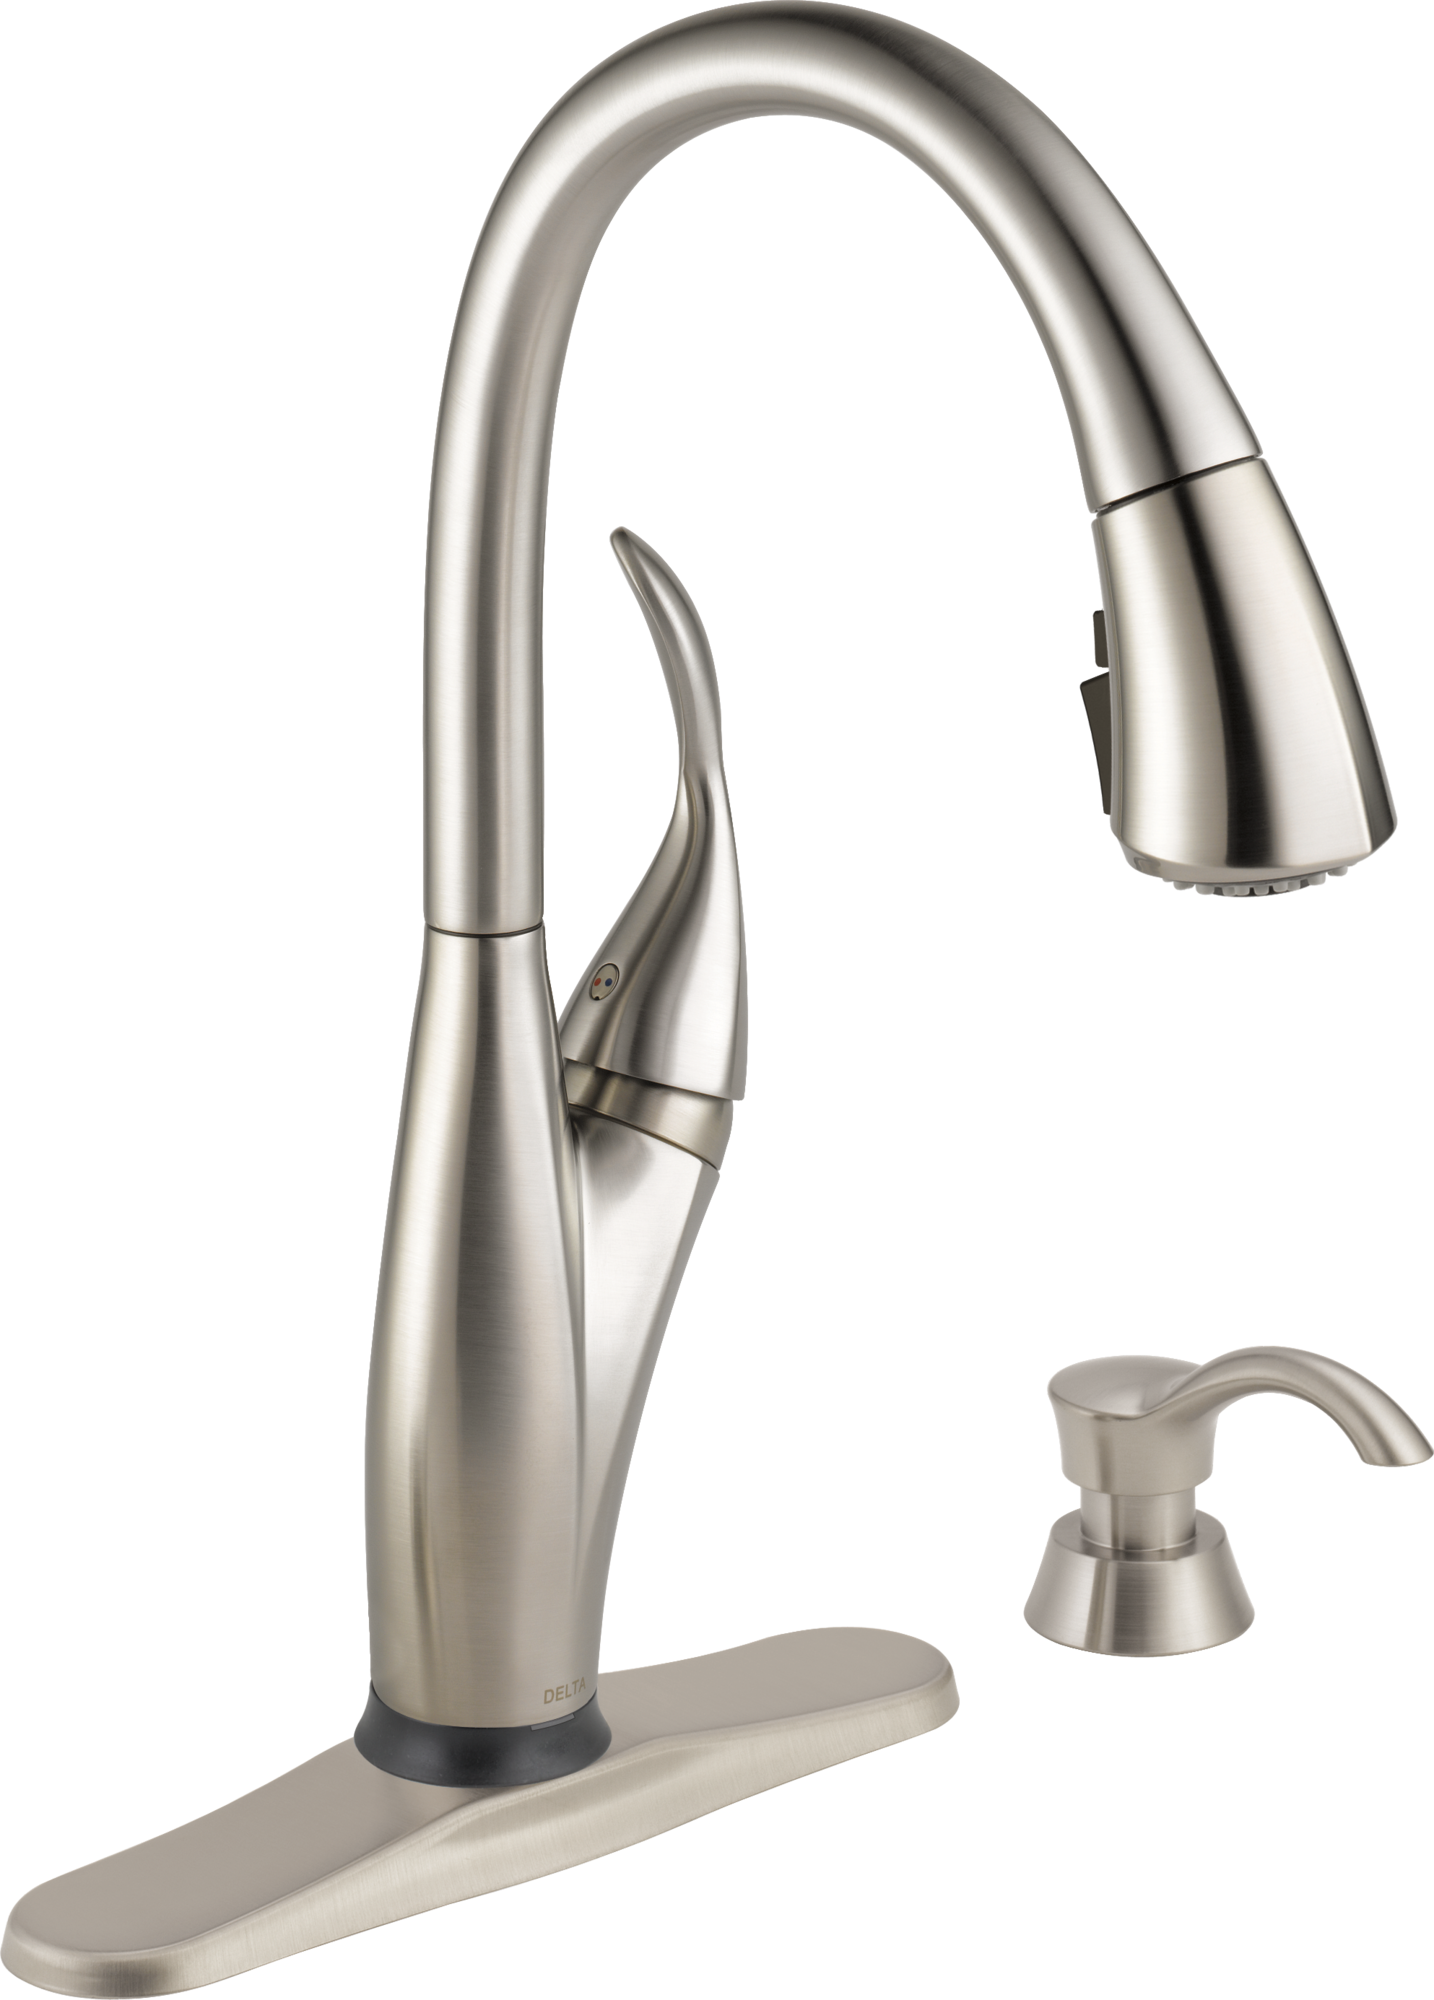 Delta Overland Touch2o SpotShield Stainless Pull Down Faucet 19934t-spsd-dst for sale online 